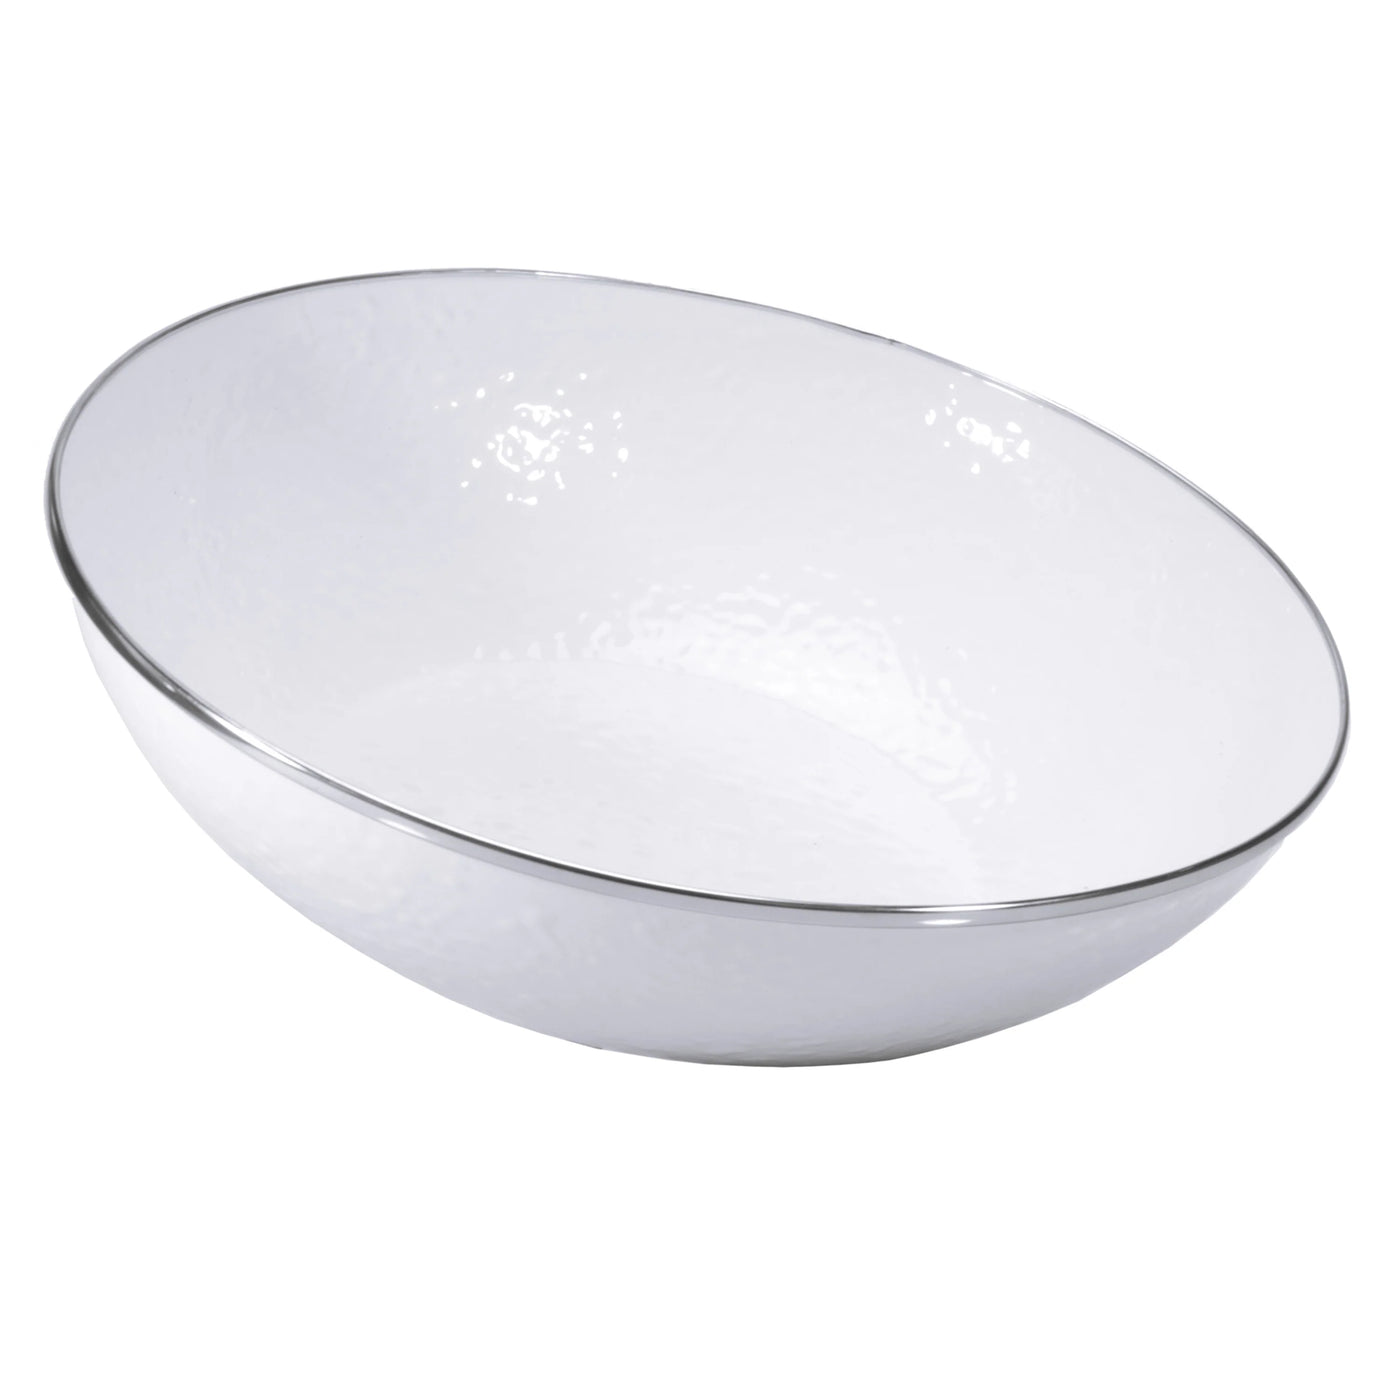 BOWL CATERING SOLID WHITE